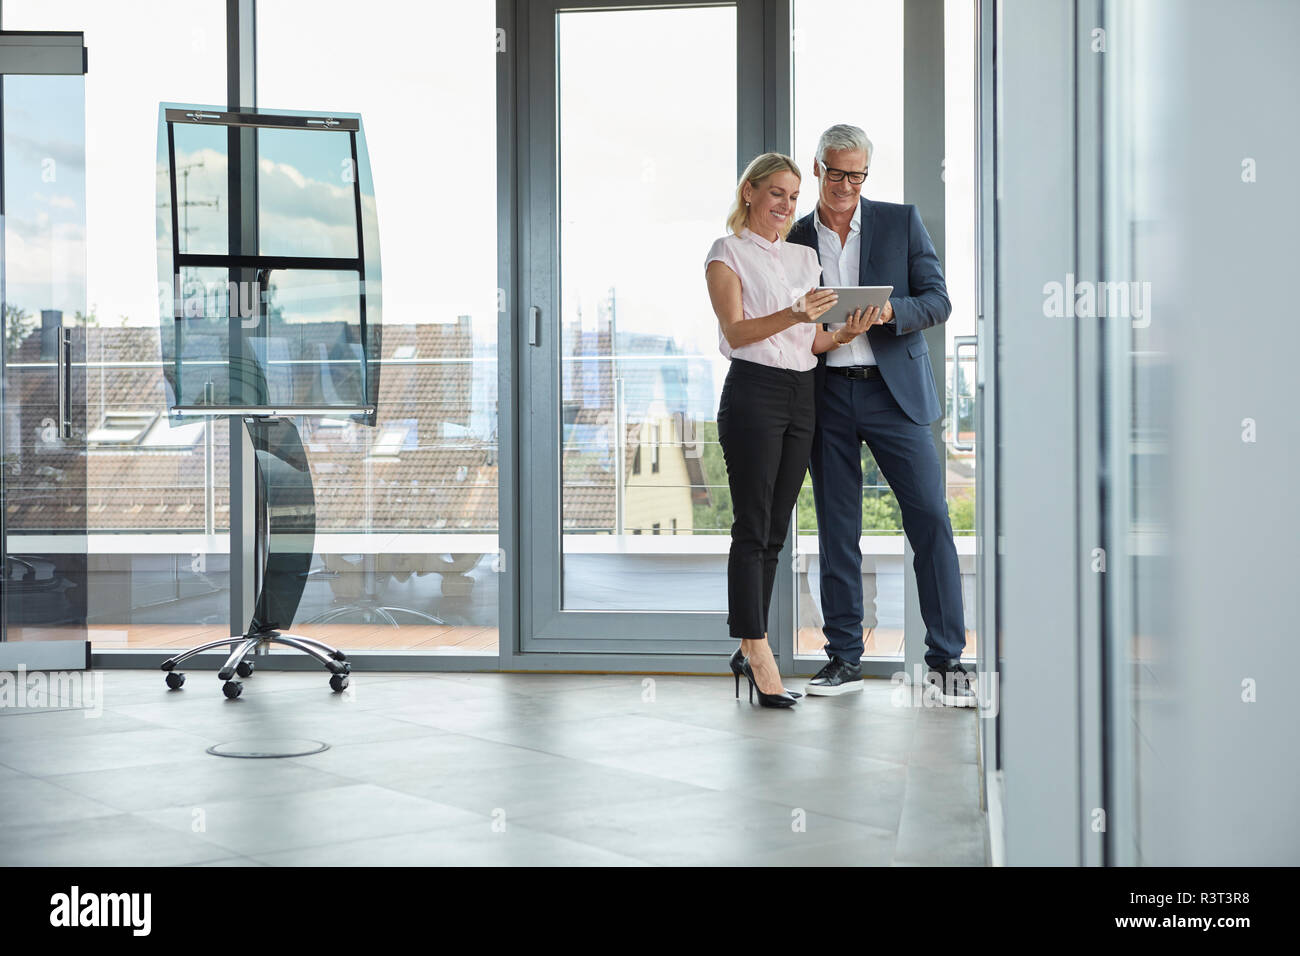 Businessman and woman standing in office, discussing project, looking at digital tabet Stock Photo